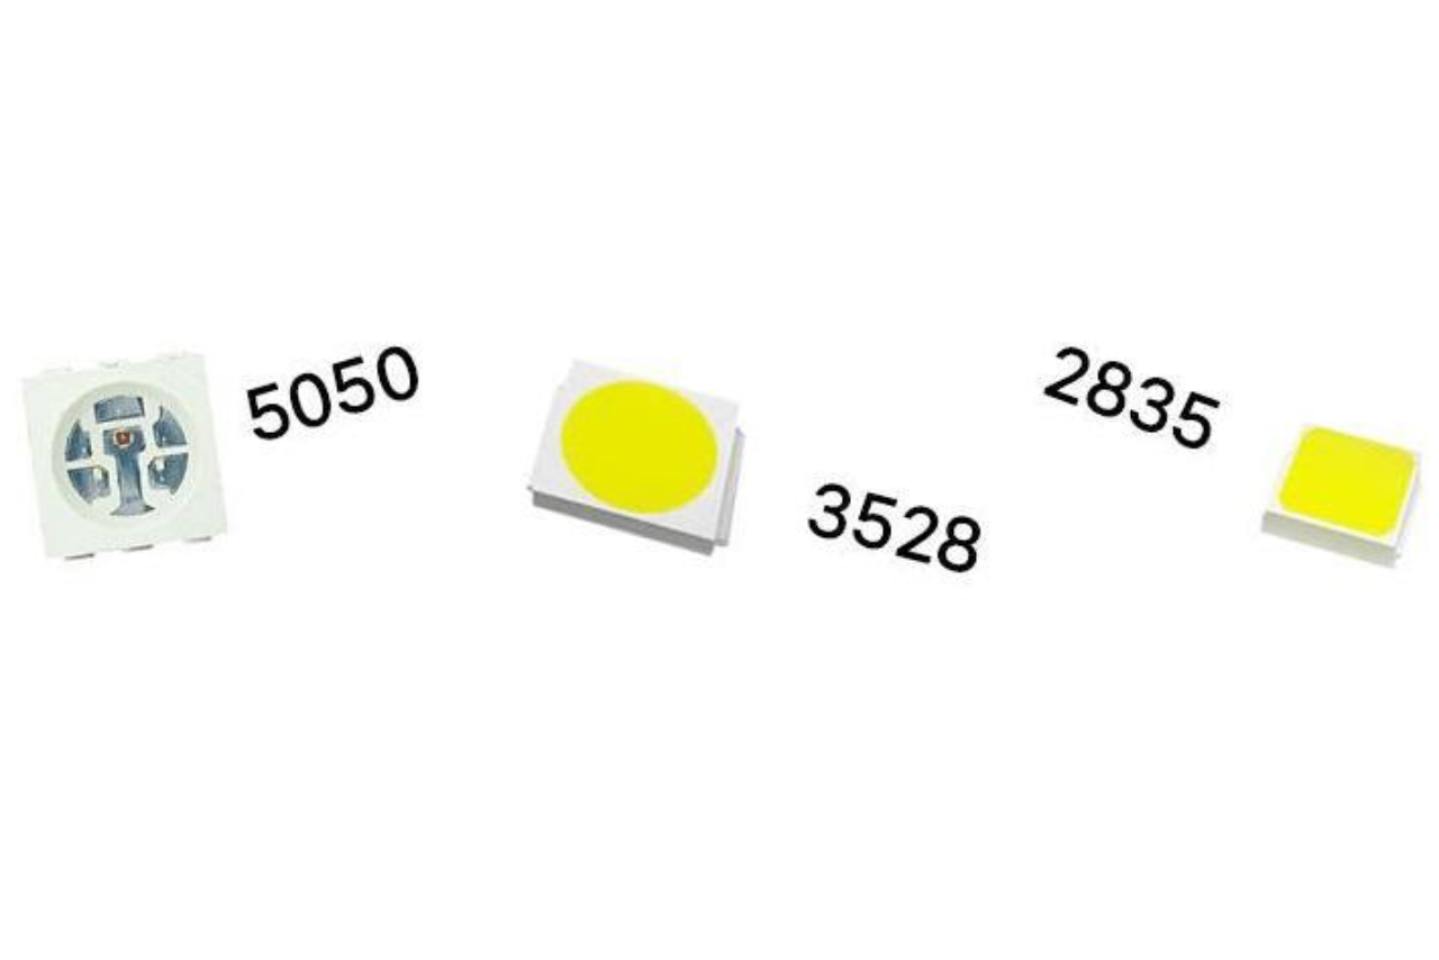 LED numbers